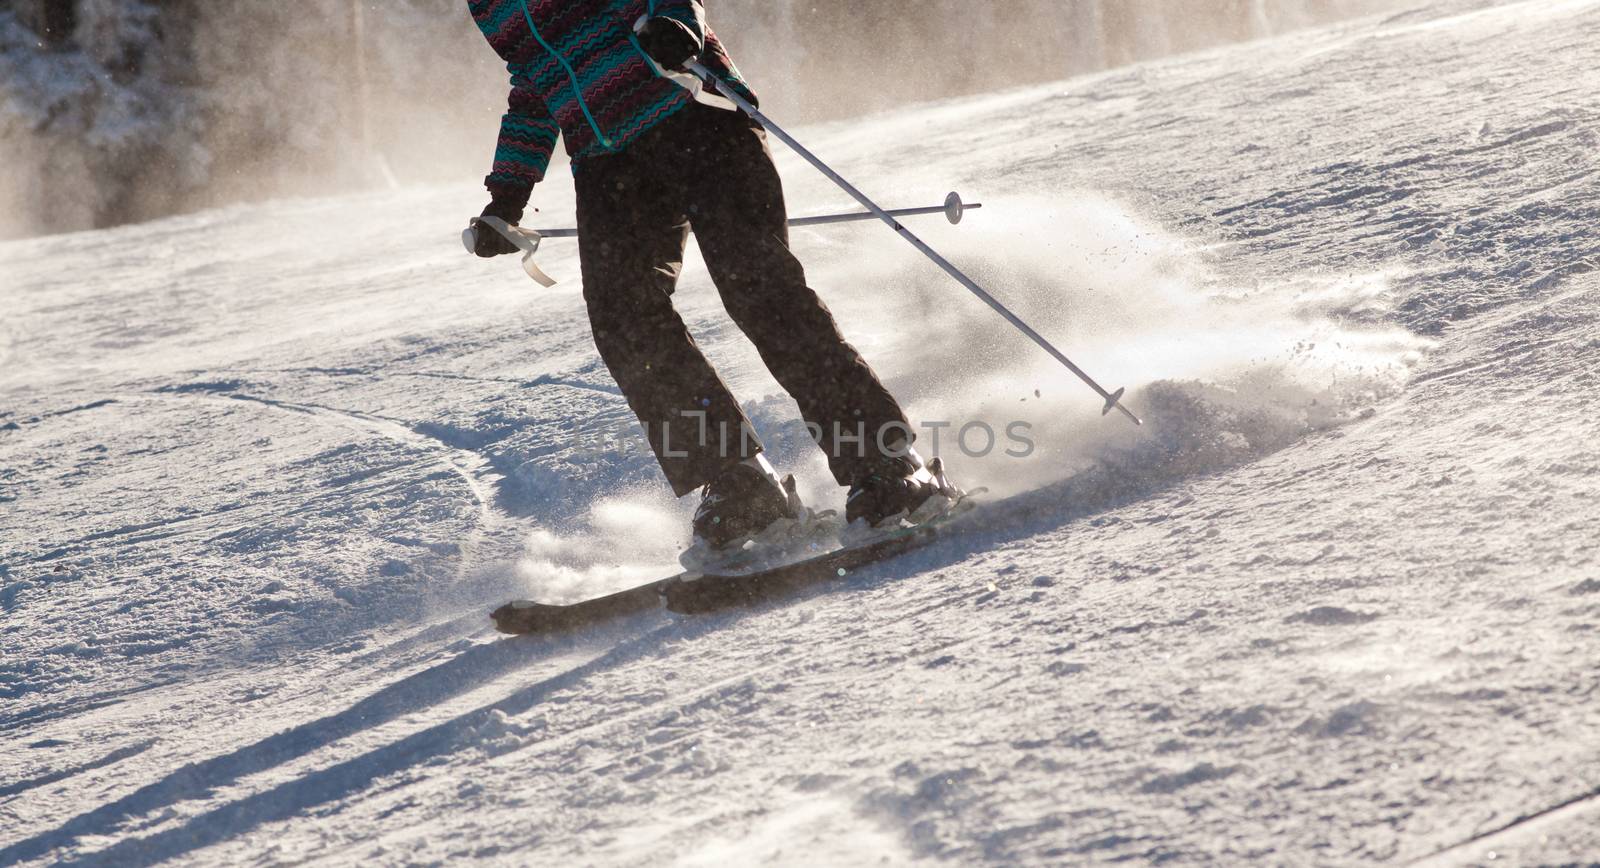 PALTINIS, ROMANIA - JANUARY 24, 2018: Unidentified skier on ski slope on January 24, 2018 in Paltinis, one of the oldest ski resorts in Romania.